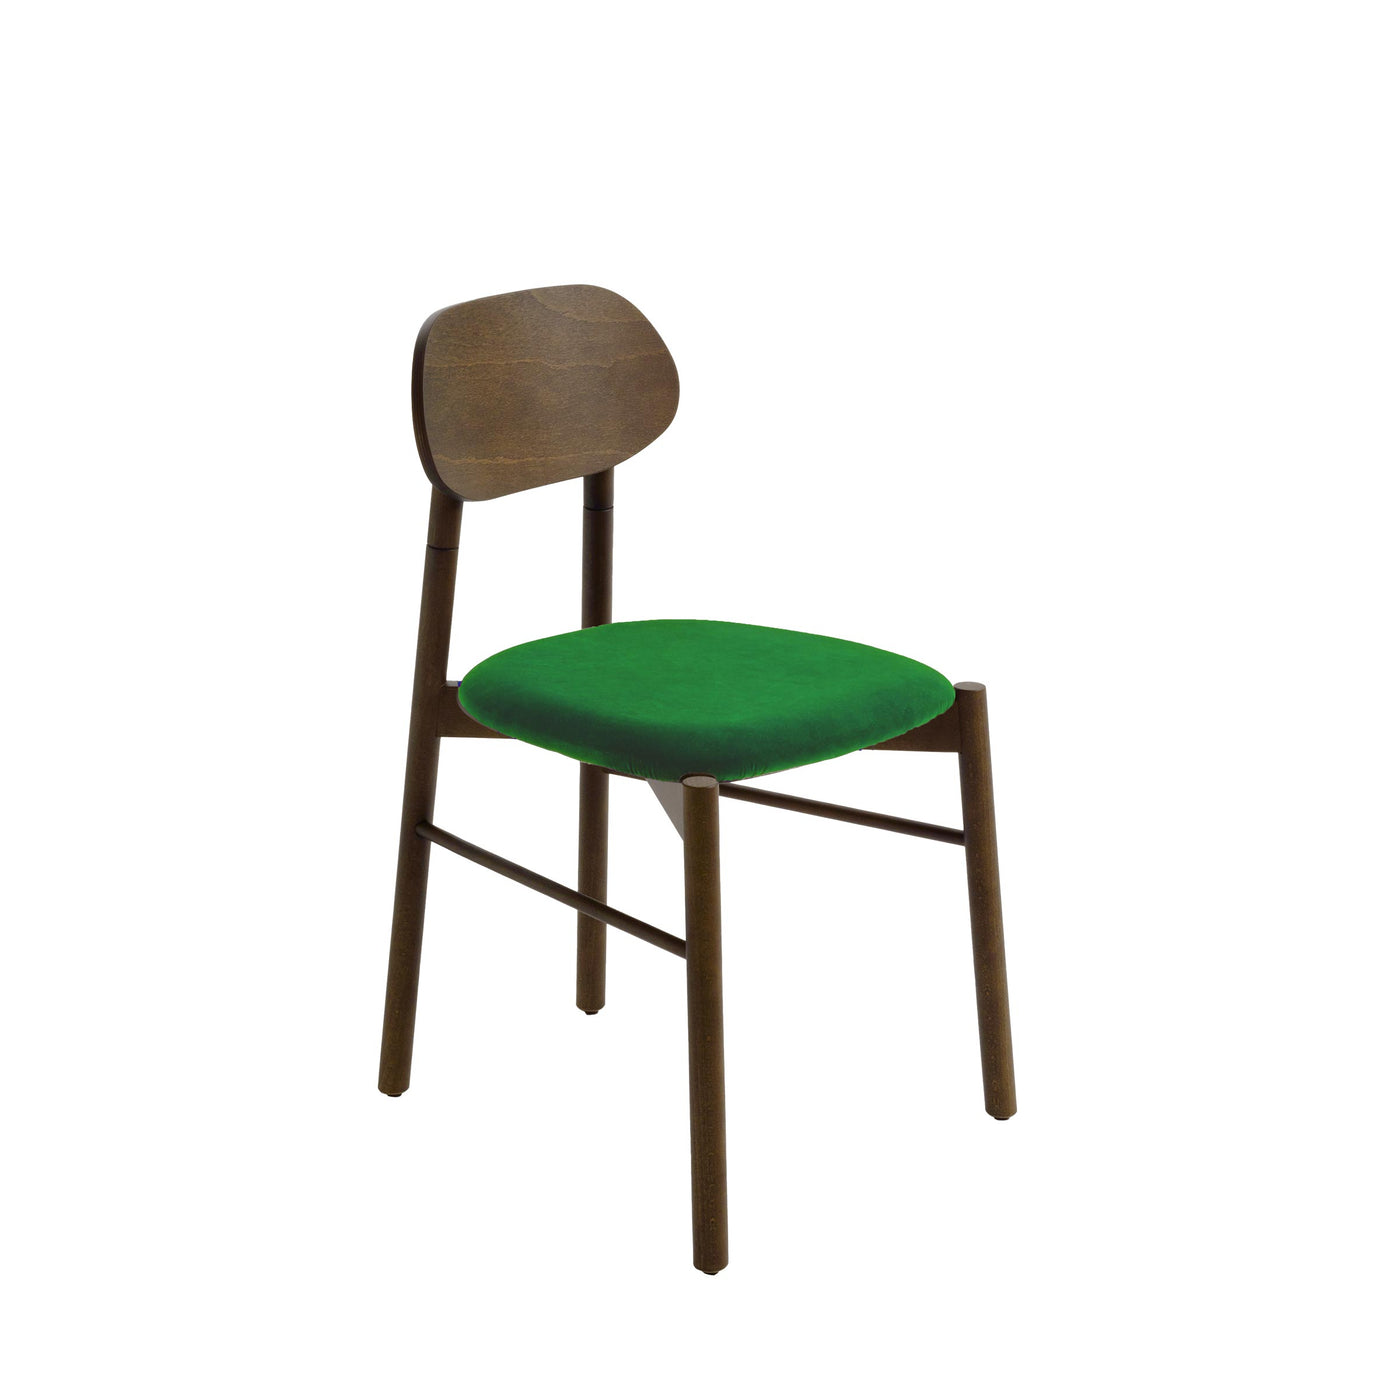 Upholstered Dining Chair BOKKEN by Bellavista + Piccini for Colé Italia 010